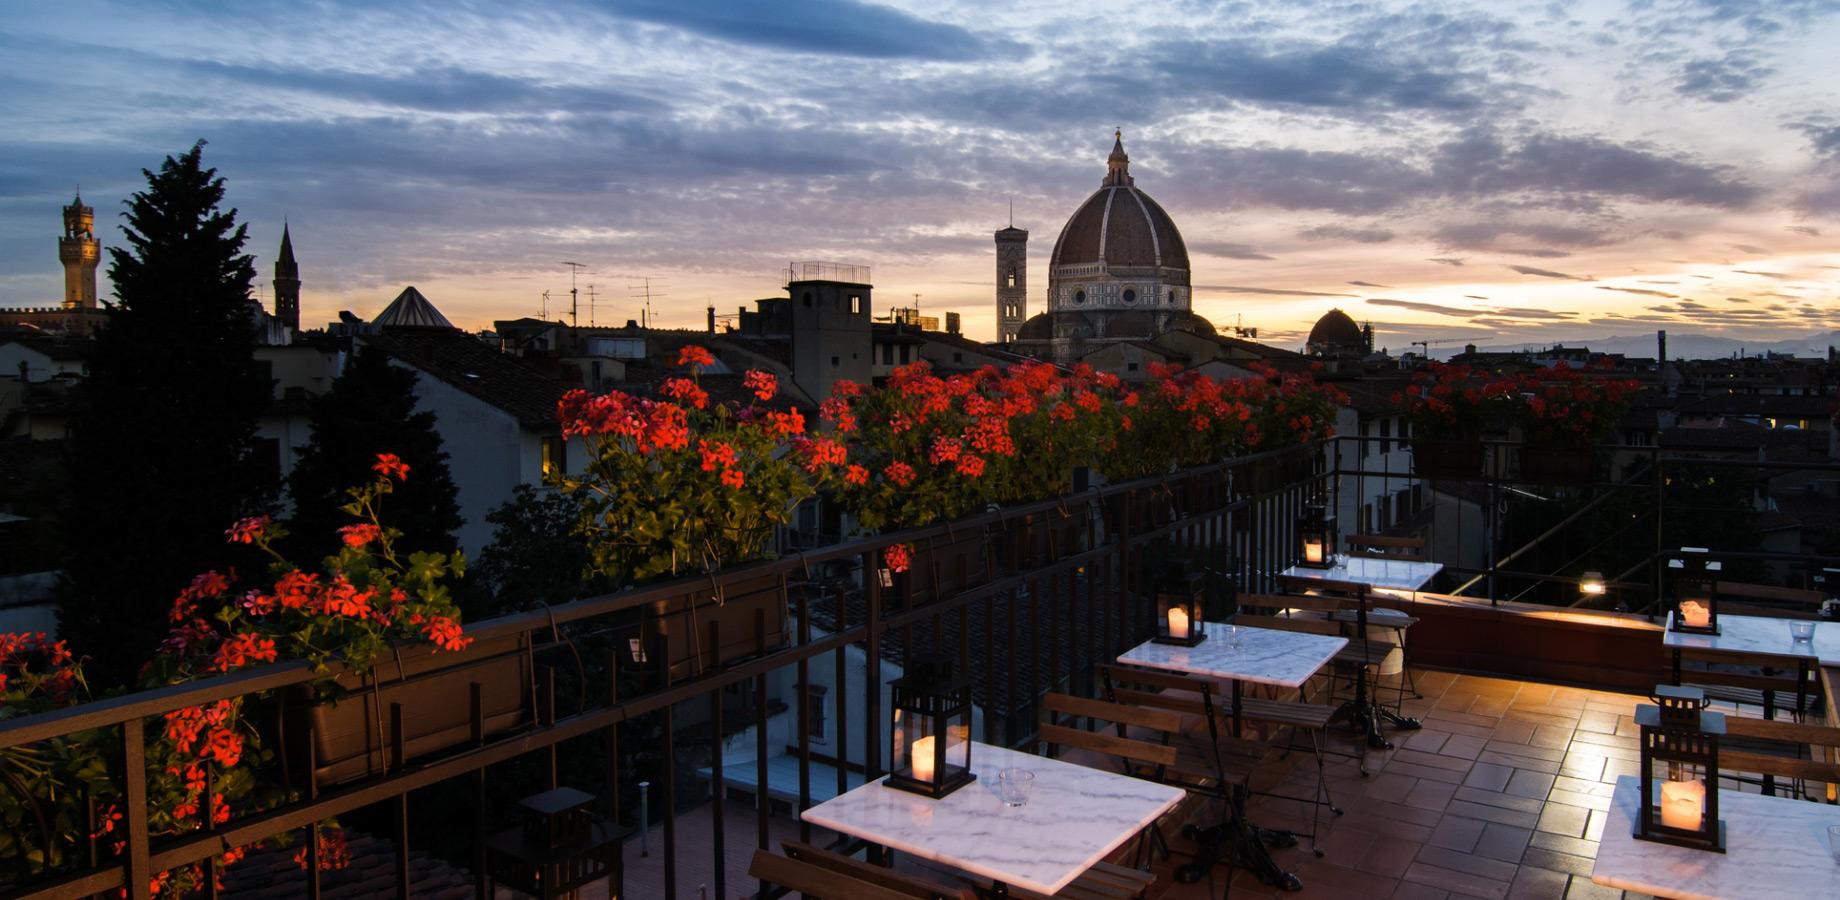 Panoramic terrace with cathedral view at sunset.